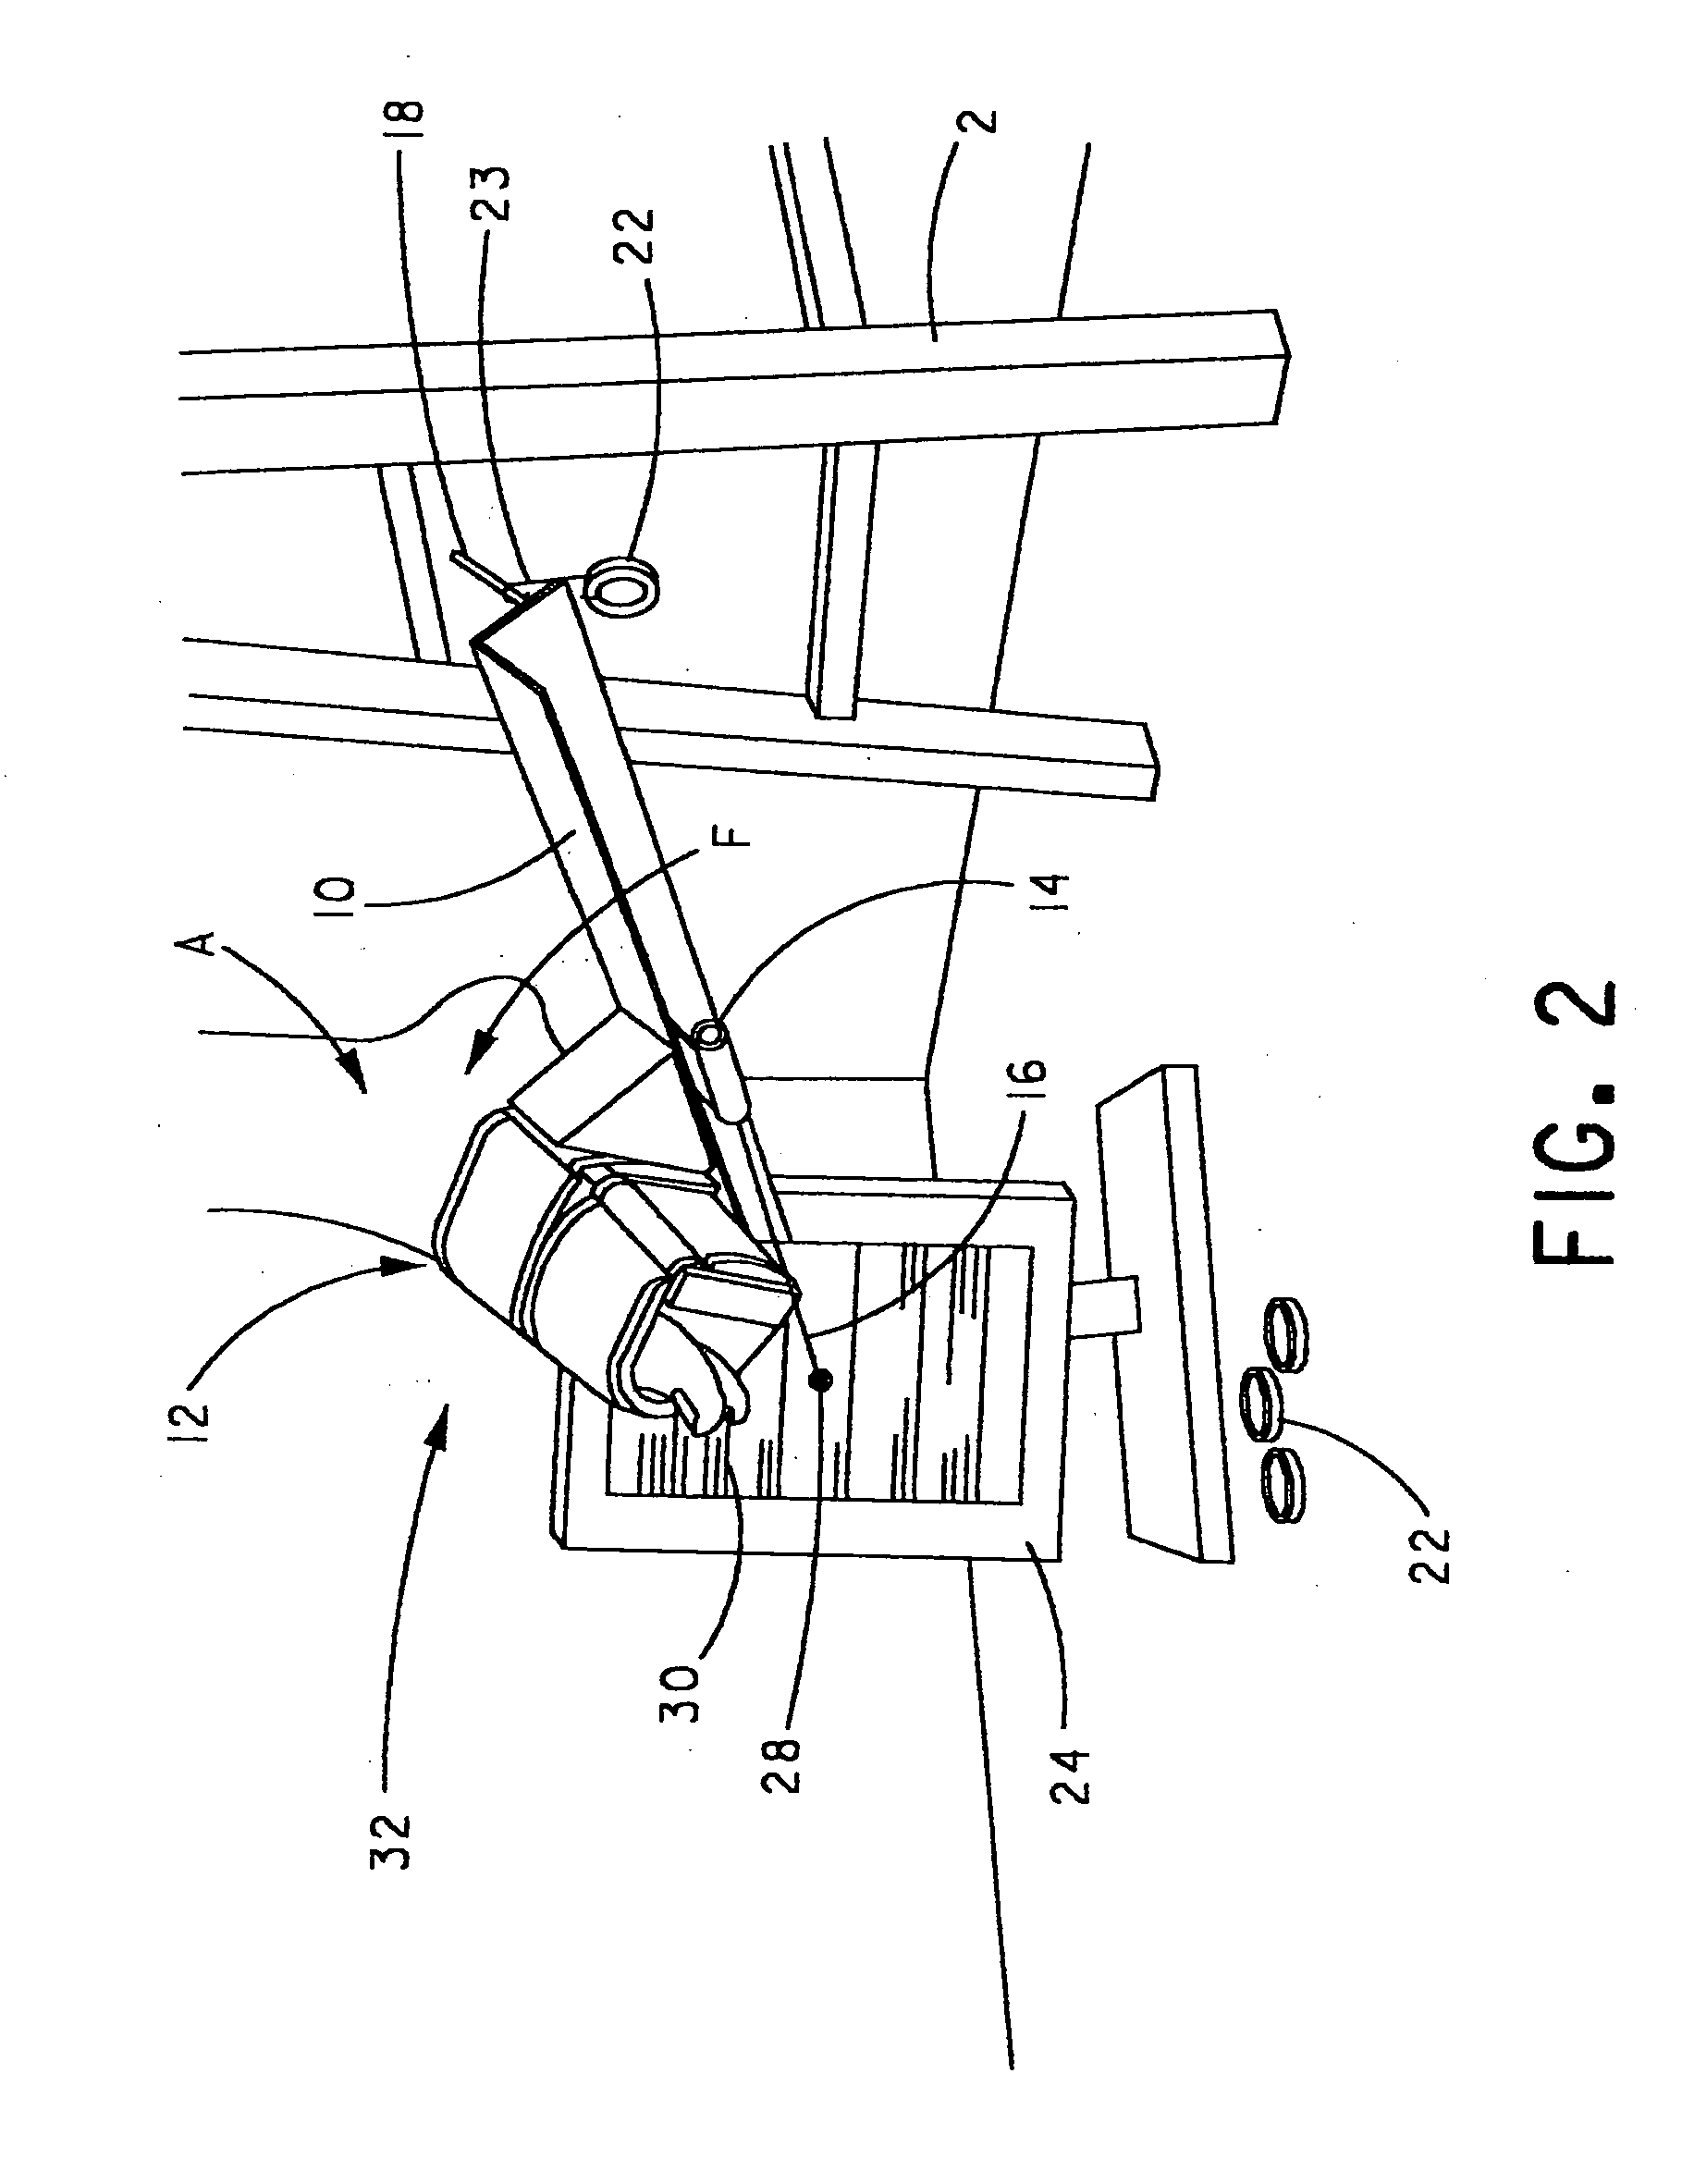 Method and apparatus for inducing and detecting ankle torsion